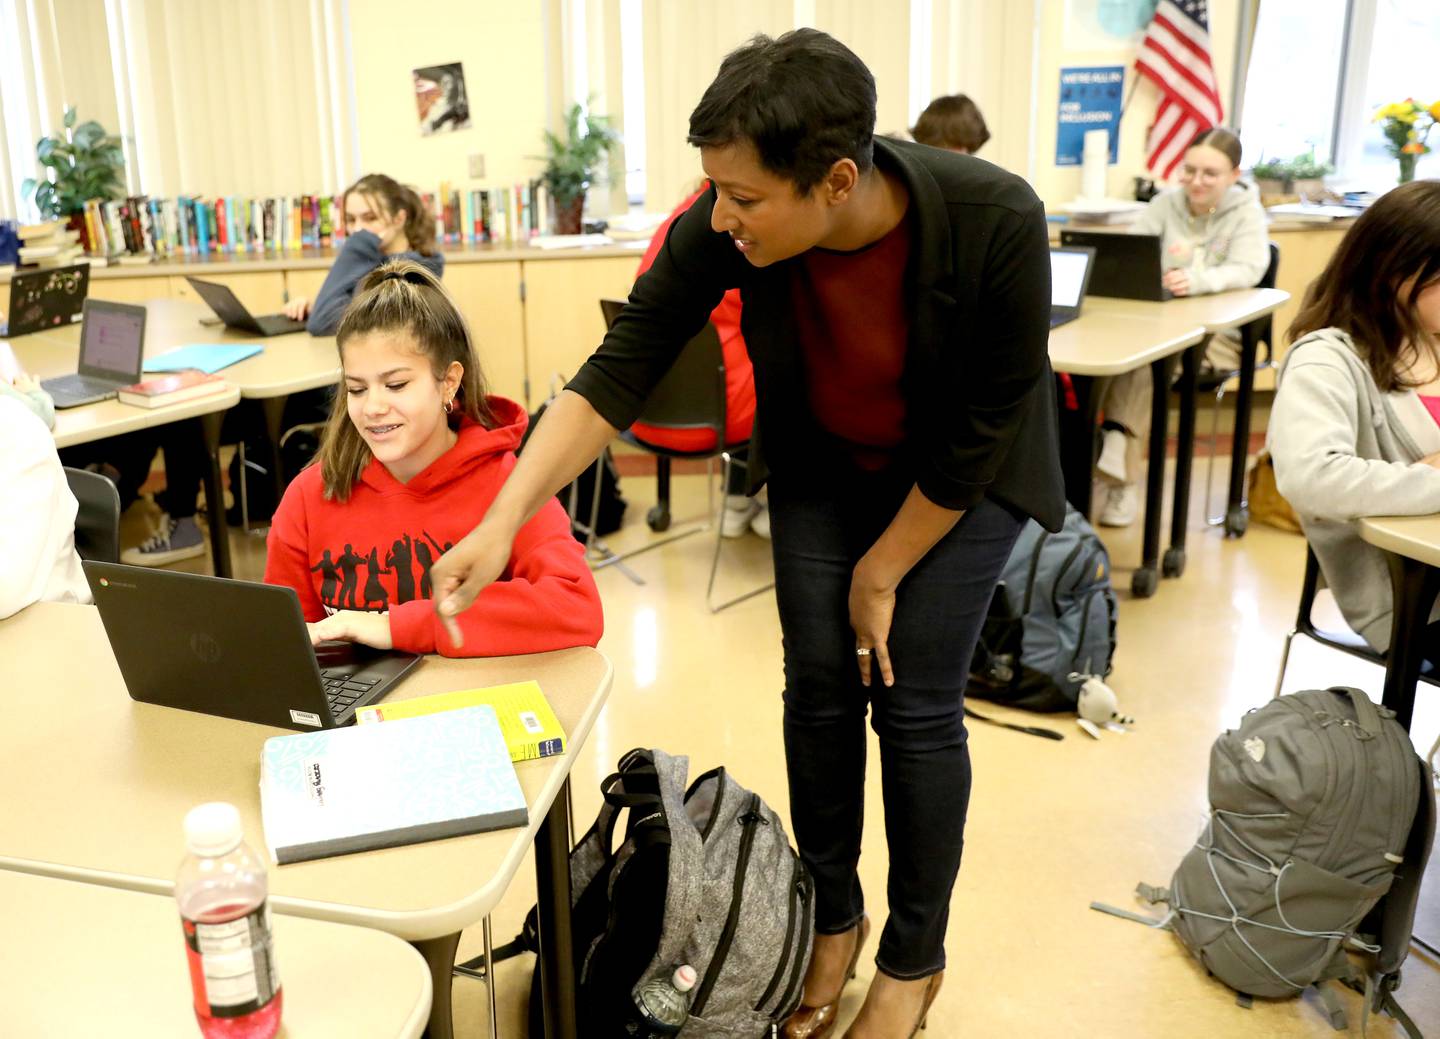 Amber Jirsa, a nominee for Illinois Teacher of the Year, helps student Elaine Panozzo during an English class at Batavia High School.